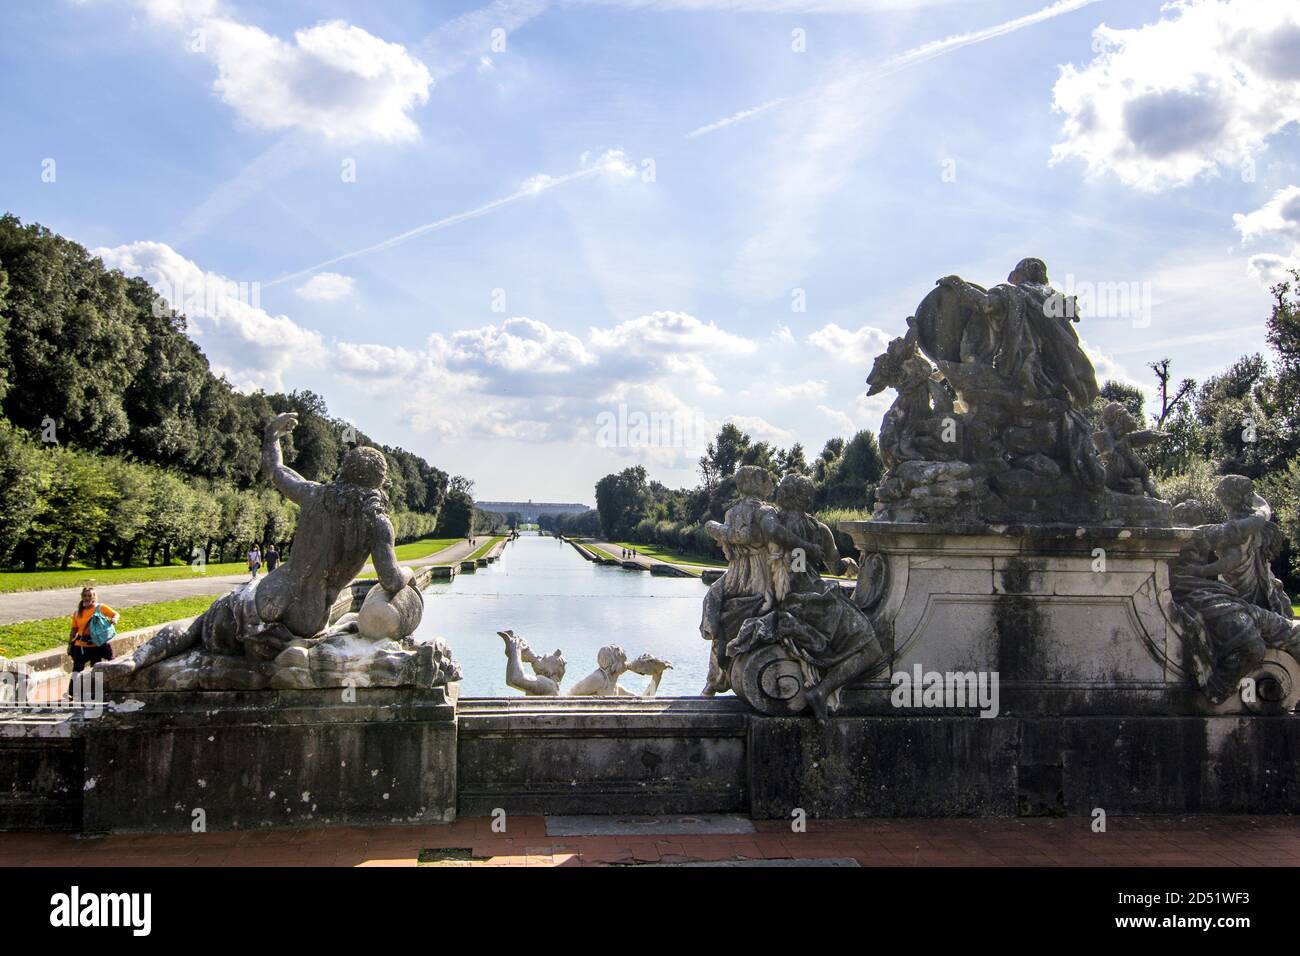 Caserta, Italy. 10th Oct, 2020. The park of the Royal Palace of Caserta, a historic royal palace with an adjoining park, is located in Caserta. It was commissioned in the 18th century by Carlo di Borbone, king of Naples and Sicily, based on a project by Luigi Vanvitelli. It occupies an area of 47,000 m² (Photo by Patrizia Cortellessa/Pacific Press) Credit: Pacific Press Media Production Corp./Alamy Live News Stock Photo